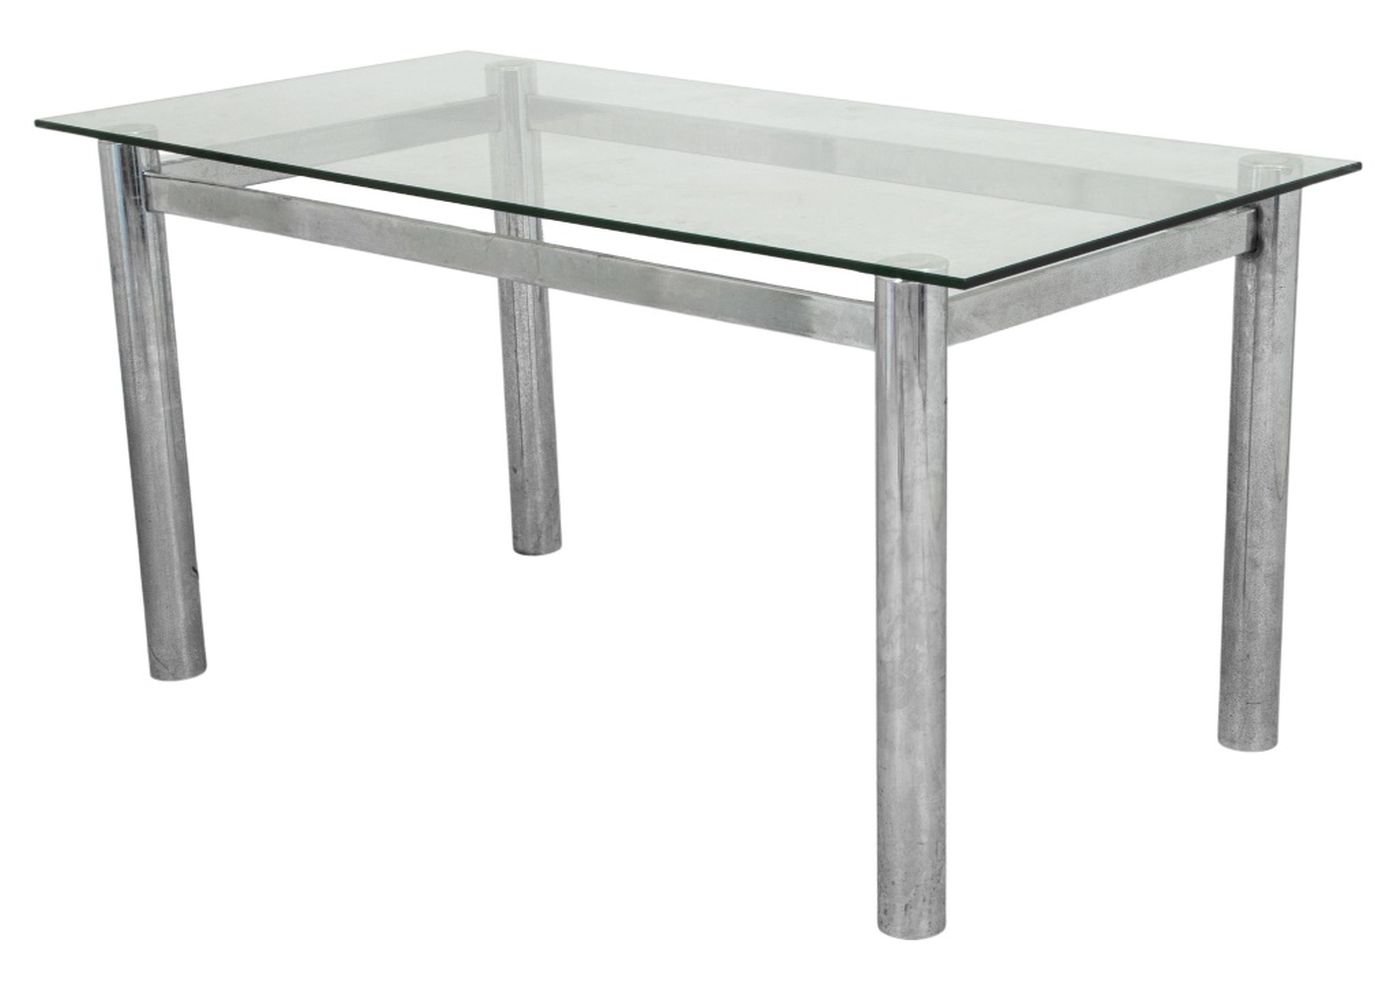 MIES VAN DER ROHE STYLE STEEL AND